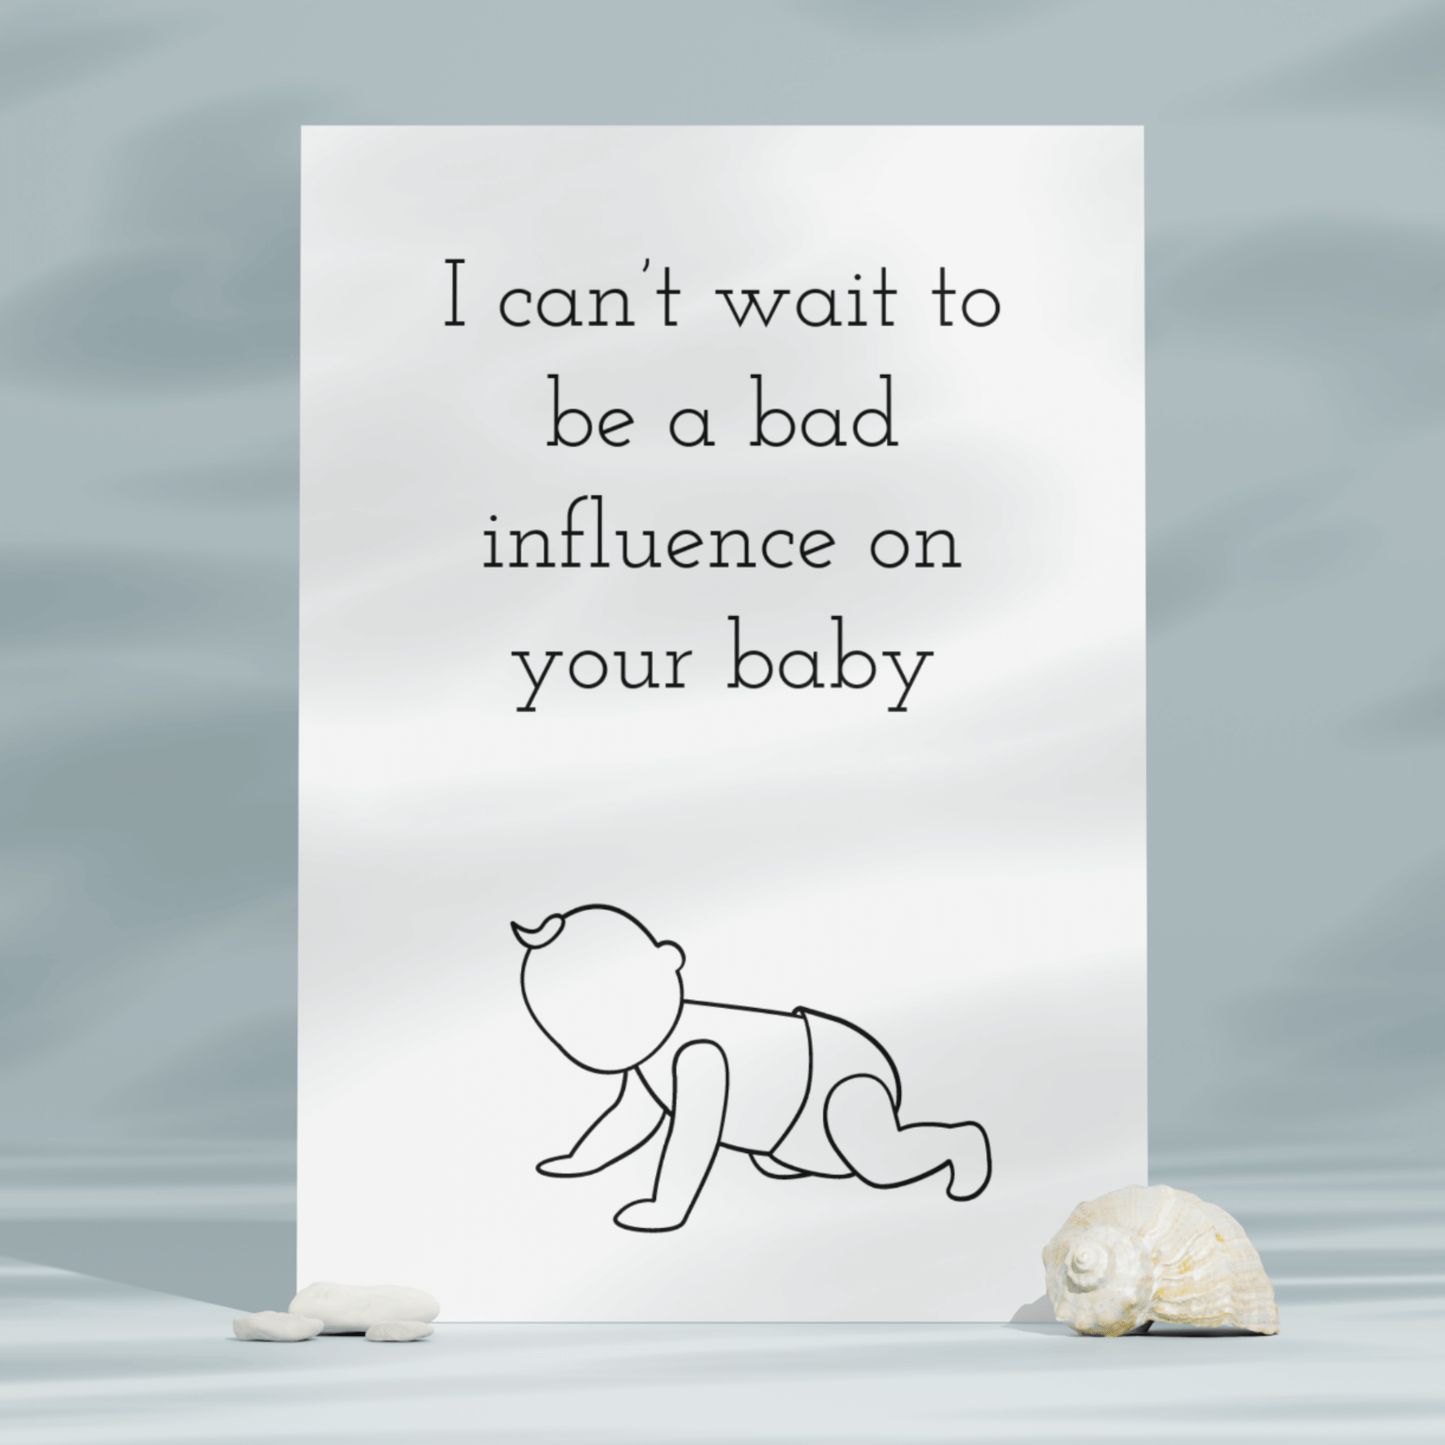 Little Kraken's Bad Influence on Your Baby, New Baby Cards for £3.50 each